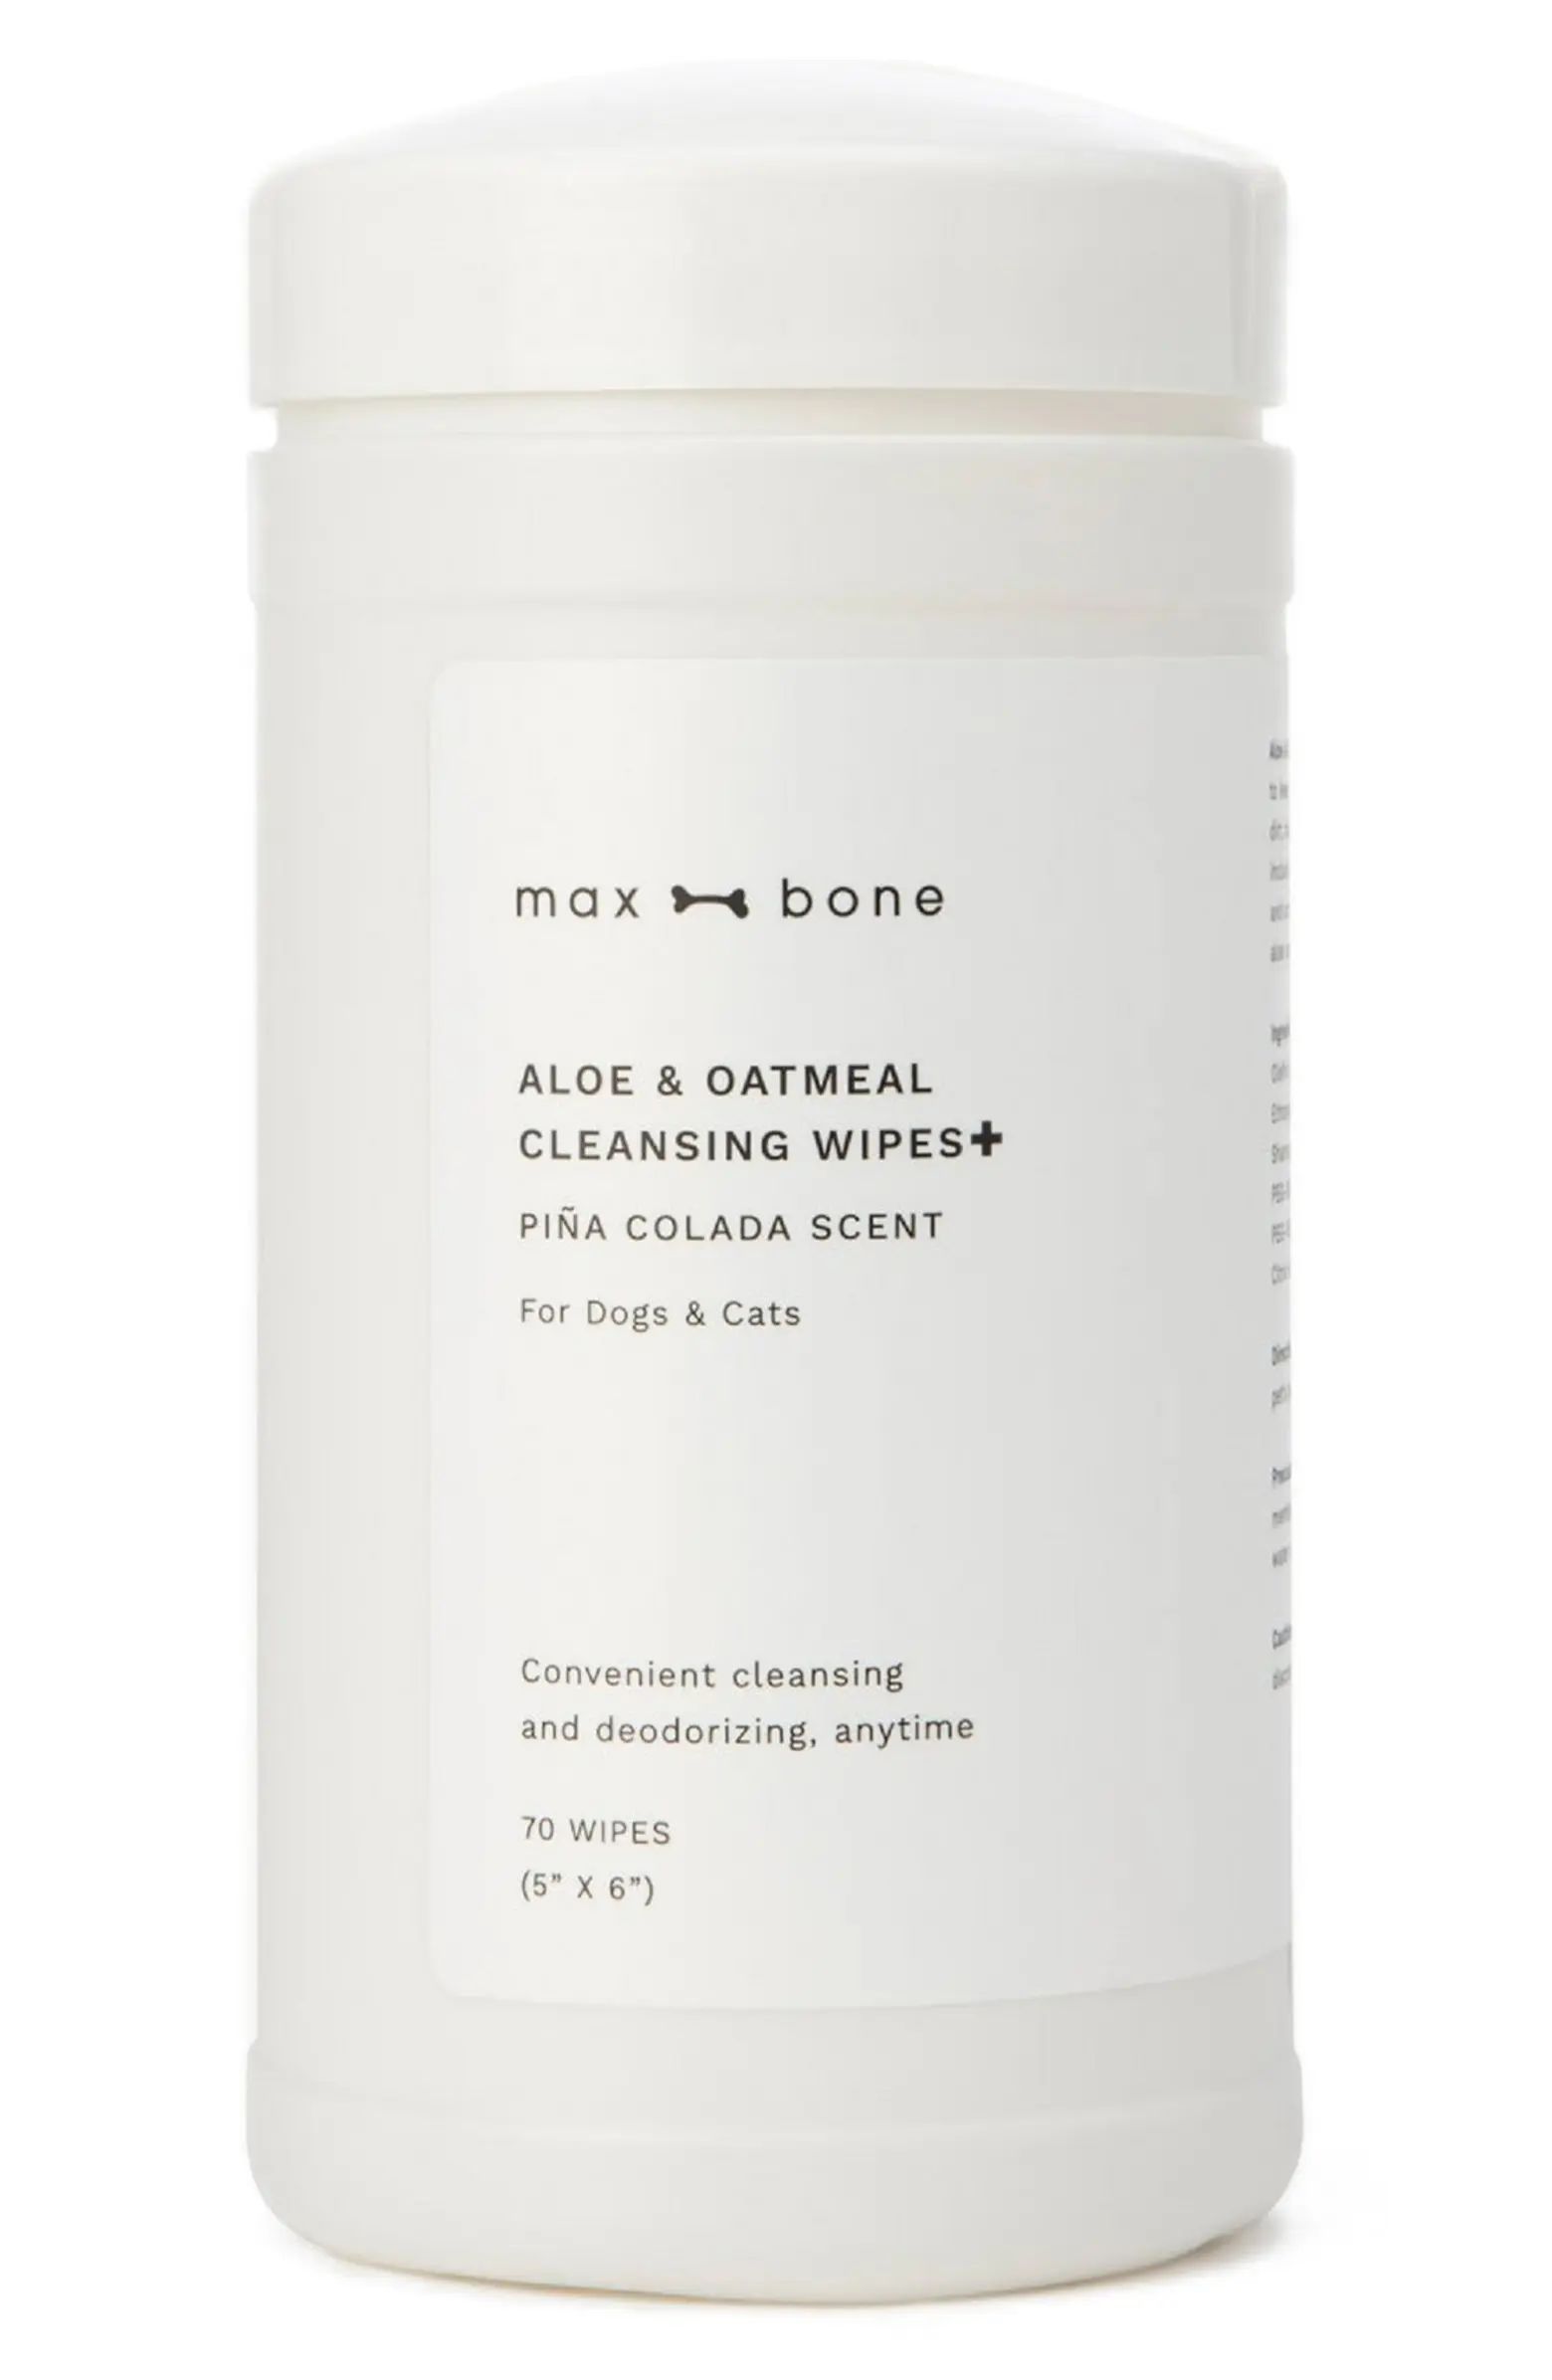 max-bone Aloe & Oatmeal Cleansing Wipes for Dogs & Cats | Nordstrom